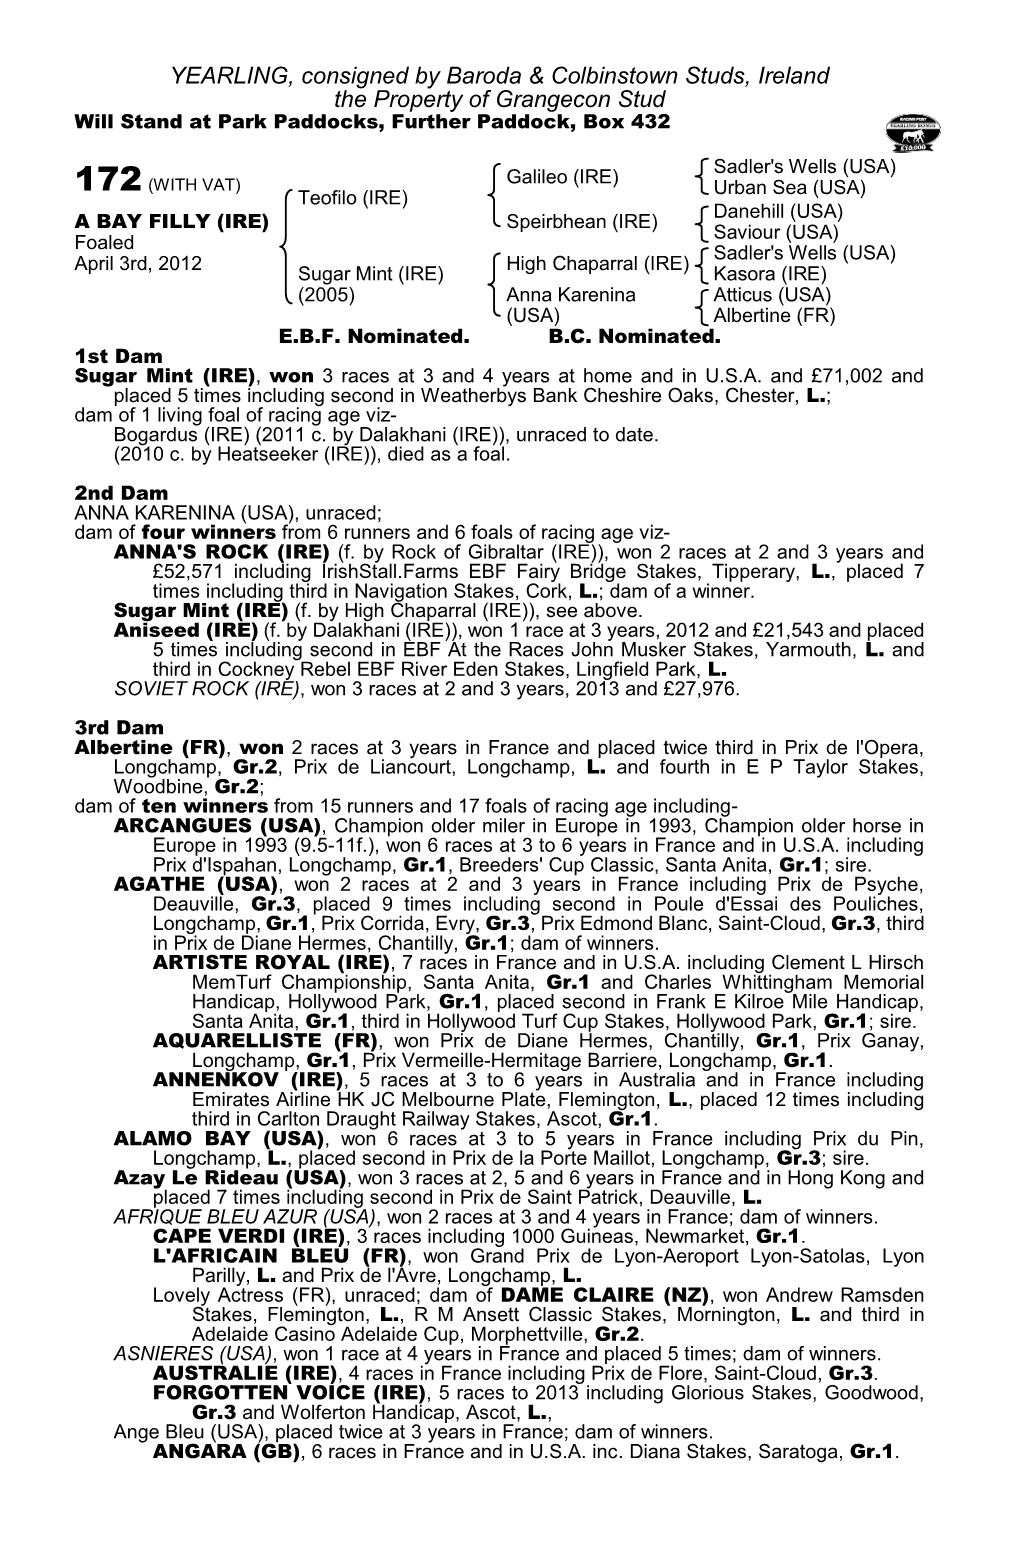 YEARLING, Consigned by Baroda & Colbinstown Studs, Ireland The